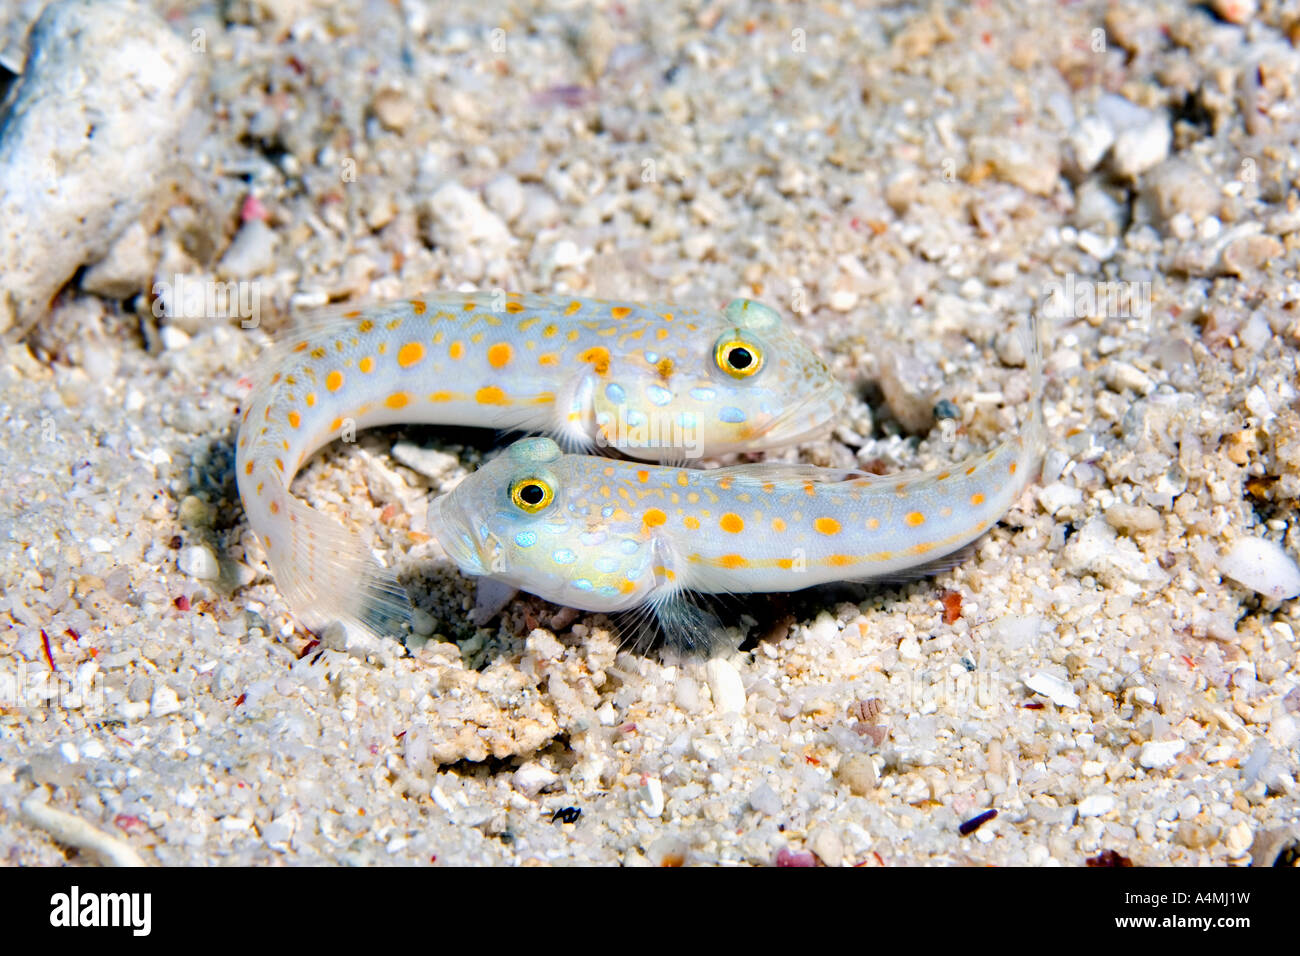 A pair of orange spotted sleeper gobies, they are also known as orange dashed goby, Valenciennea puellaris Stock Photo